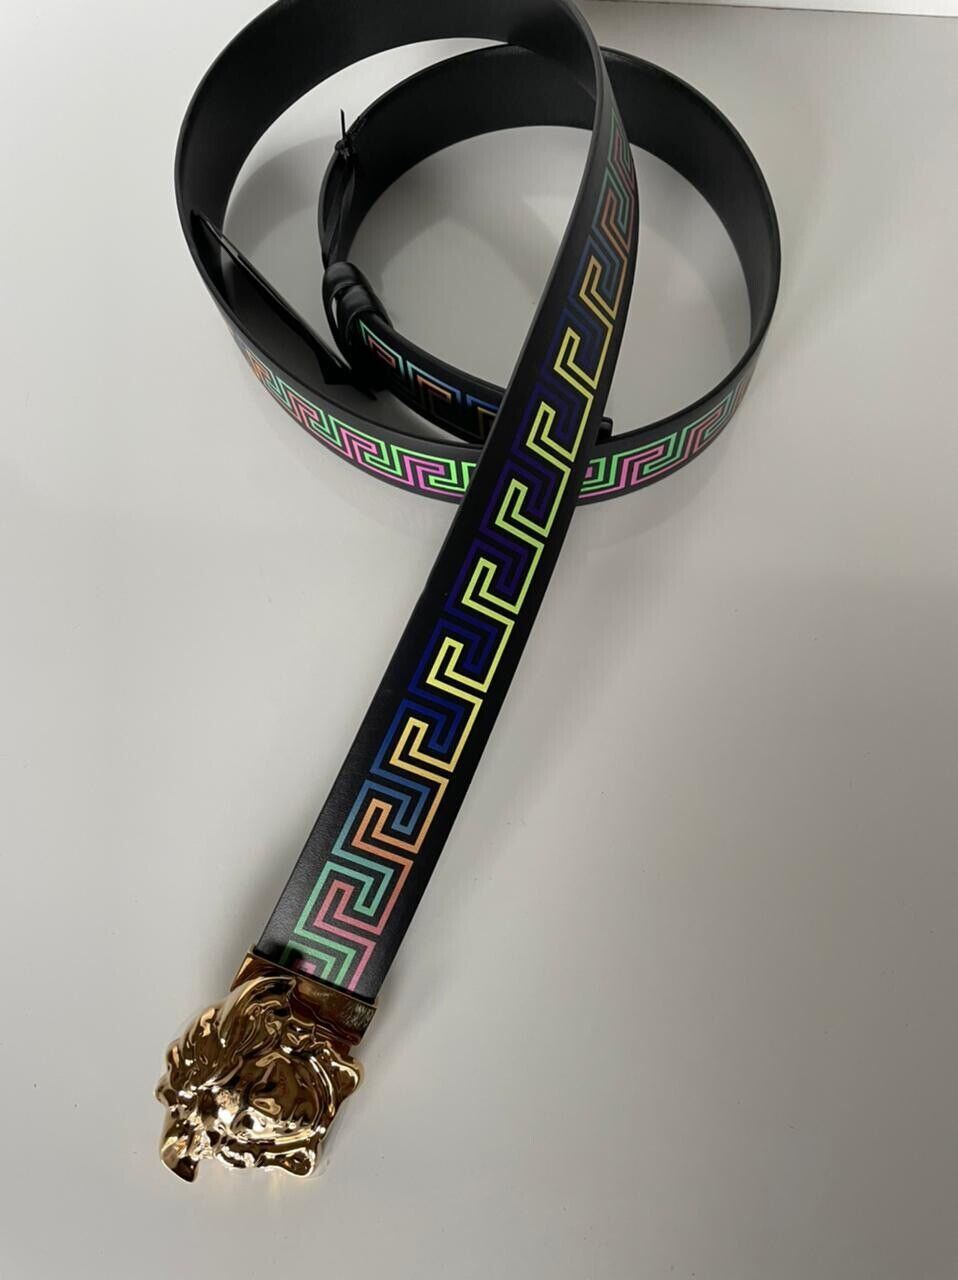 NWT $550 Versace Medusa Greek-Print Cut-To-Size Leather Belt Two sided 130 (52)